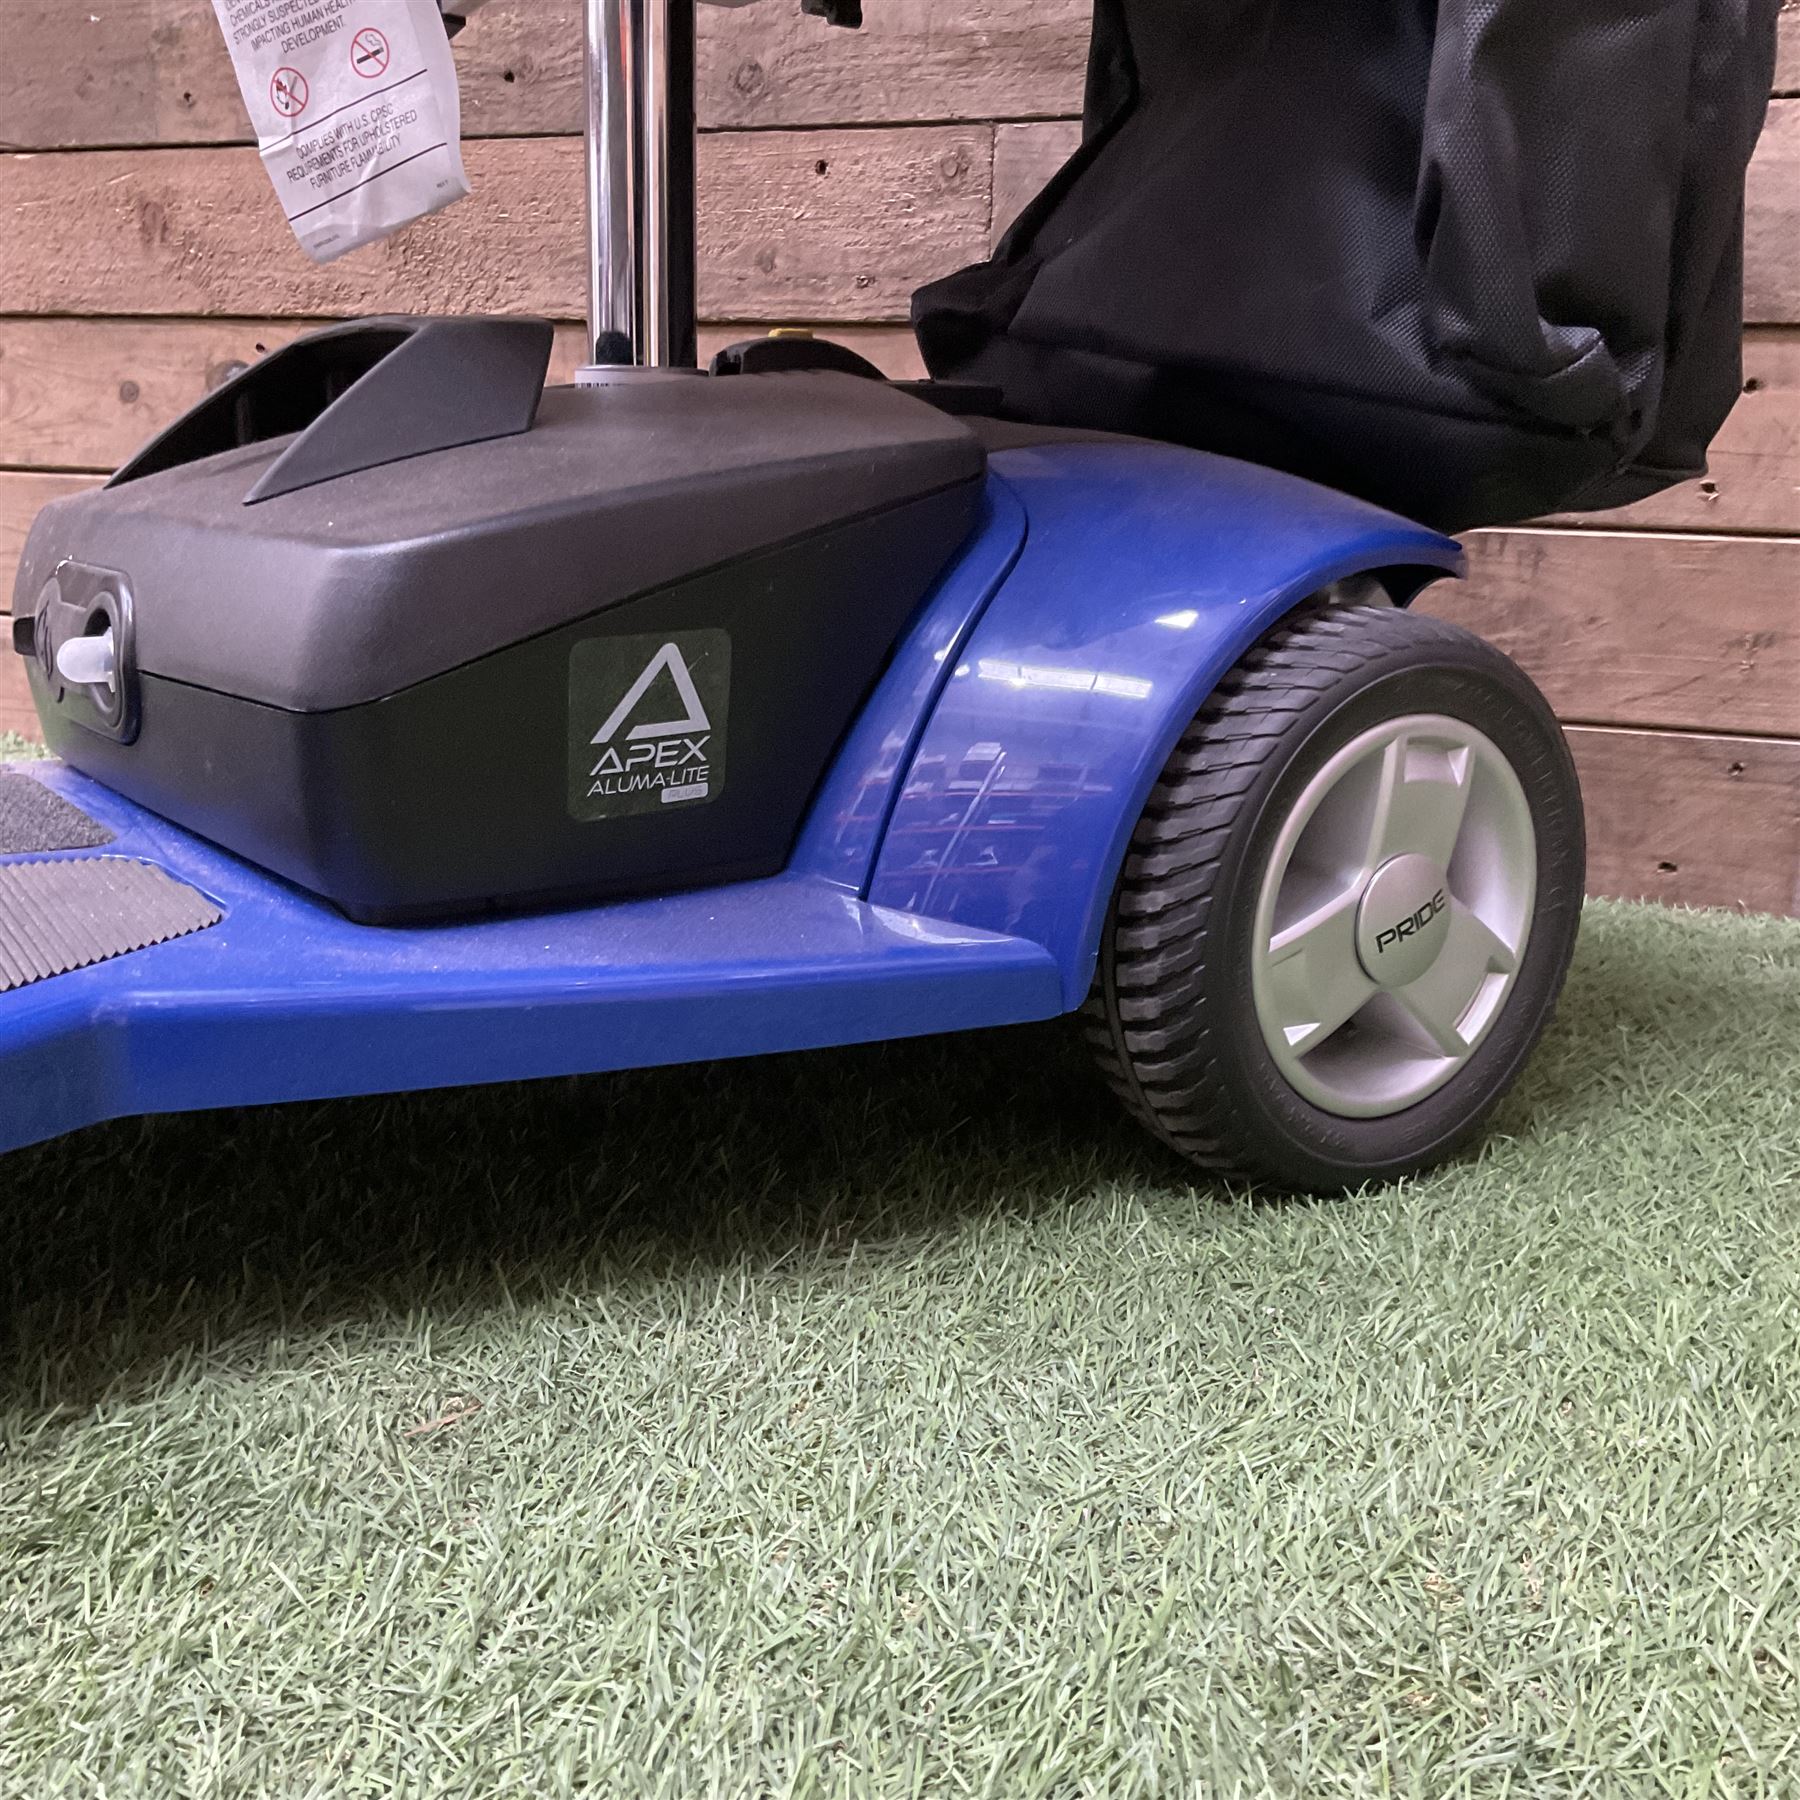 Pride four wheel electric mobility scooter in blue with key and charger - Image 2 of 4